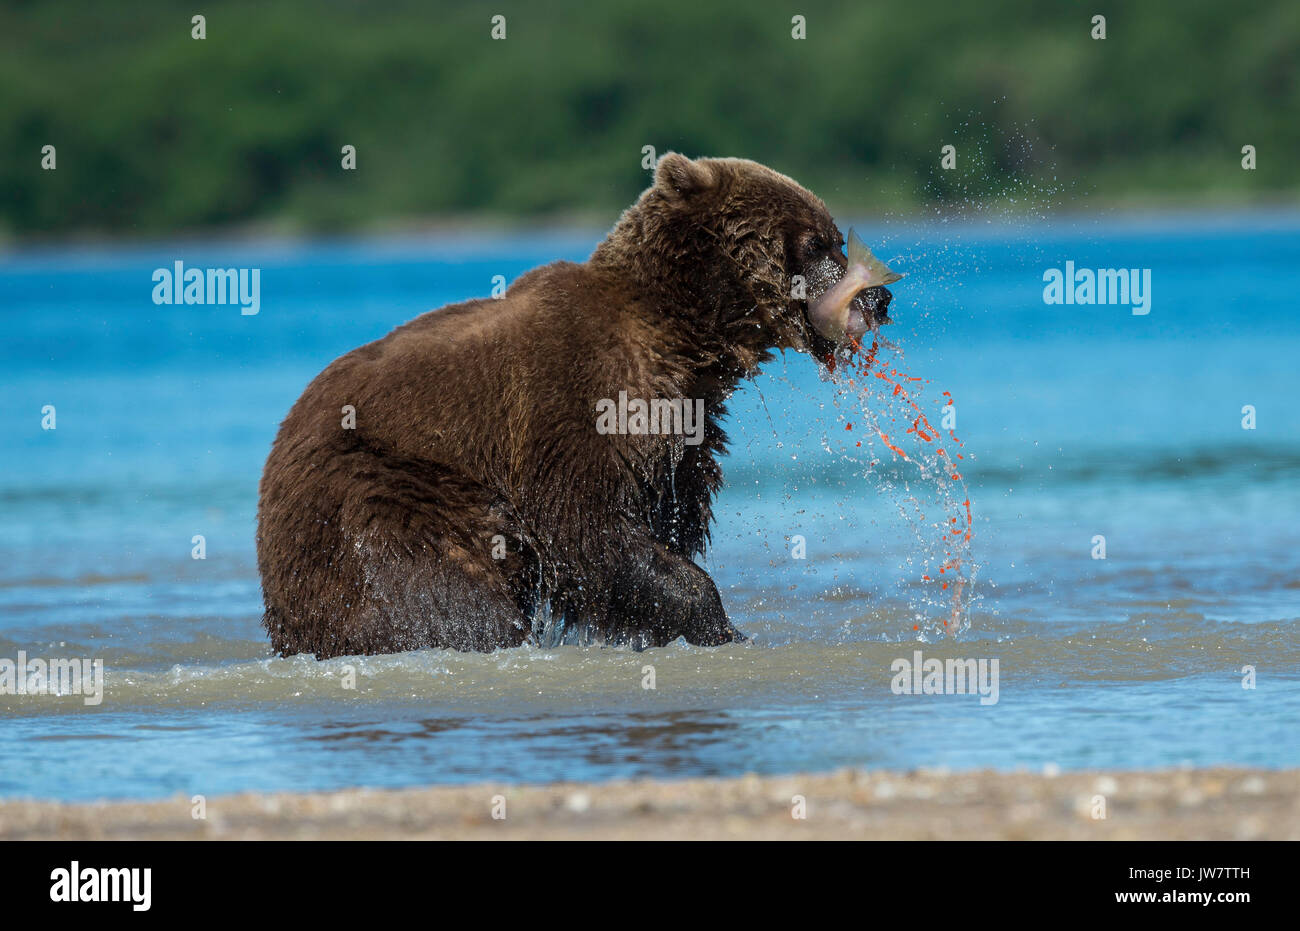 Fish roe spurting from a sockeye salmon as it is being eaten by a brown bear, Kamchatka, Russia. Stock Photo